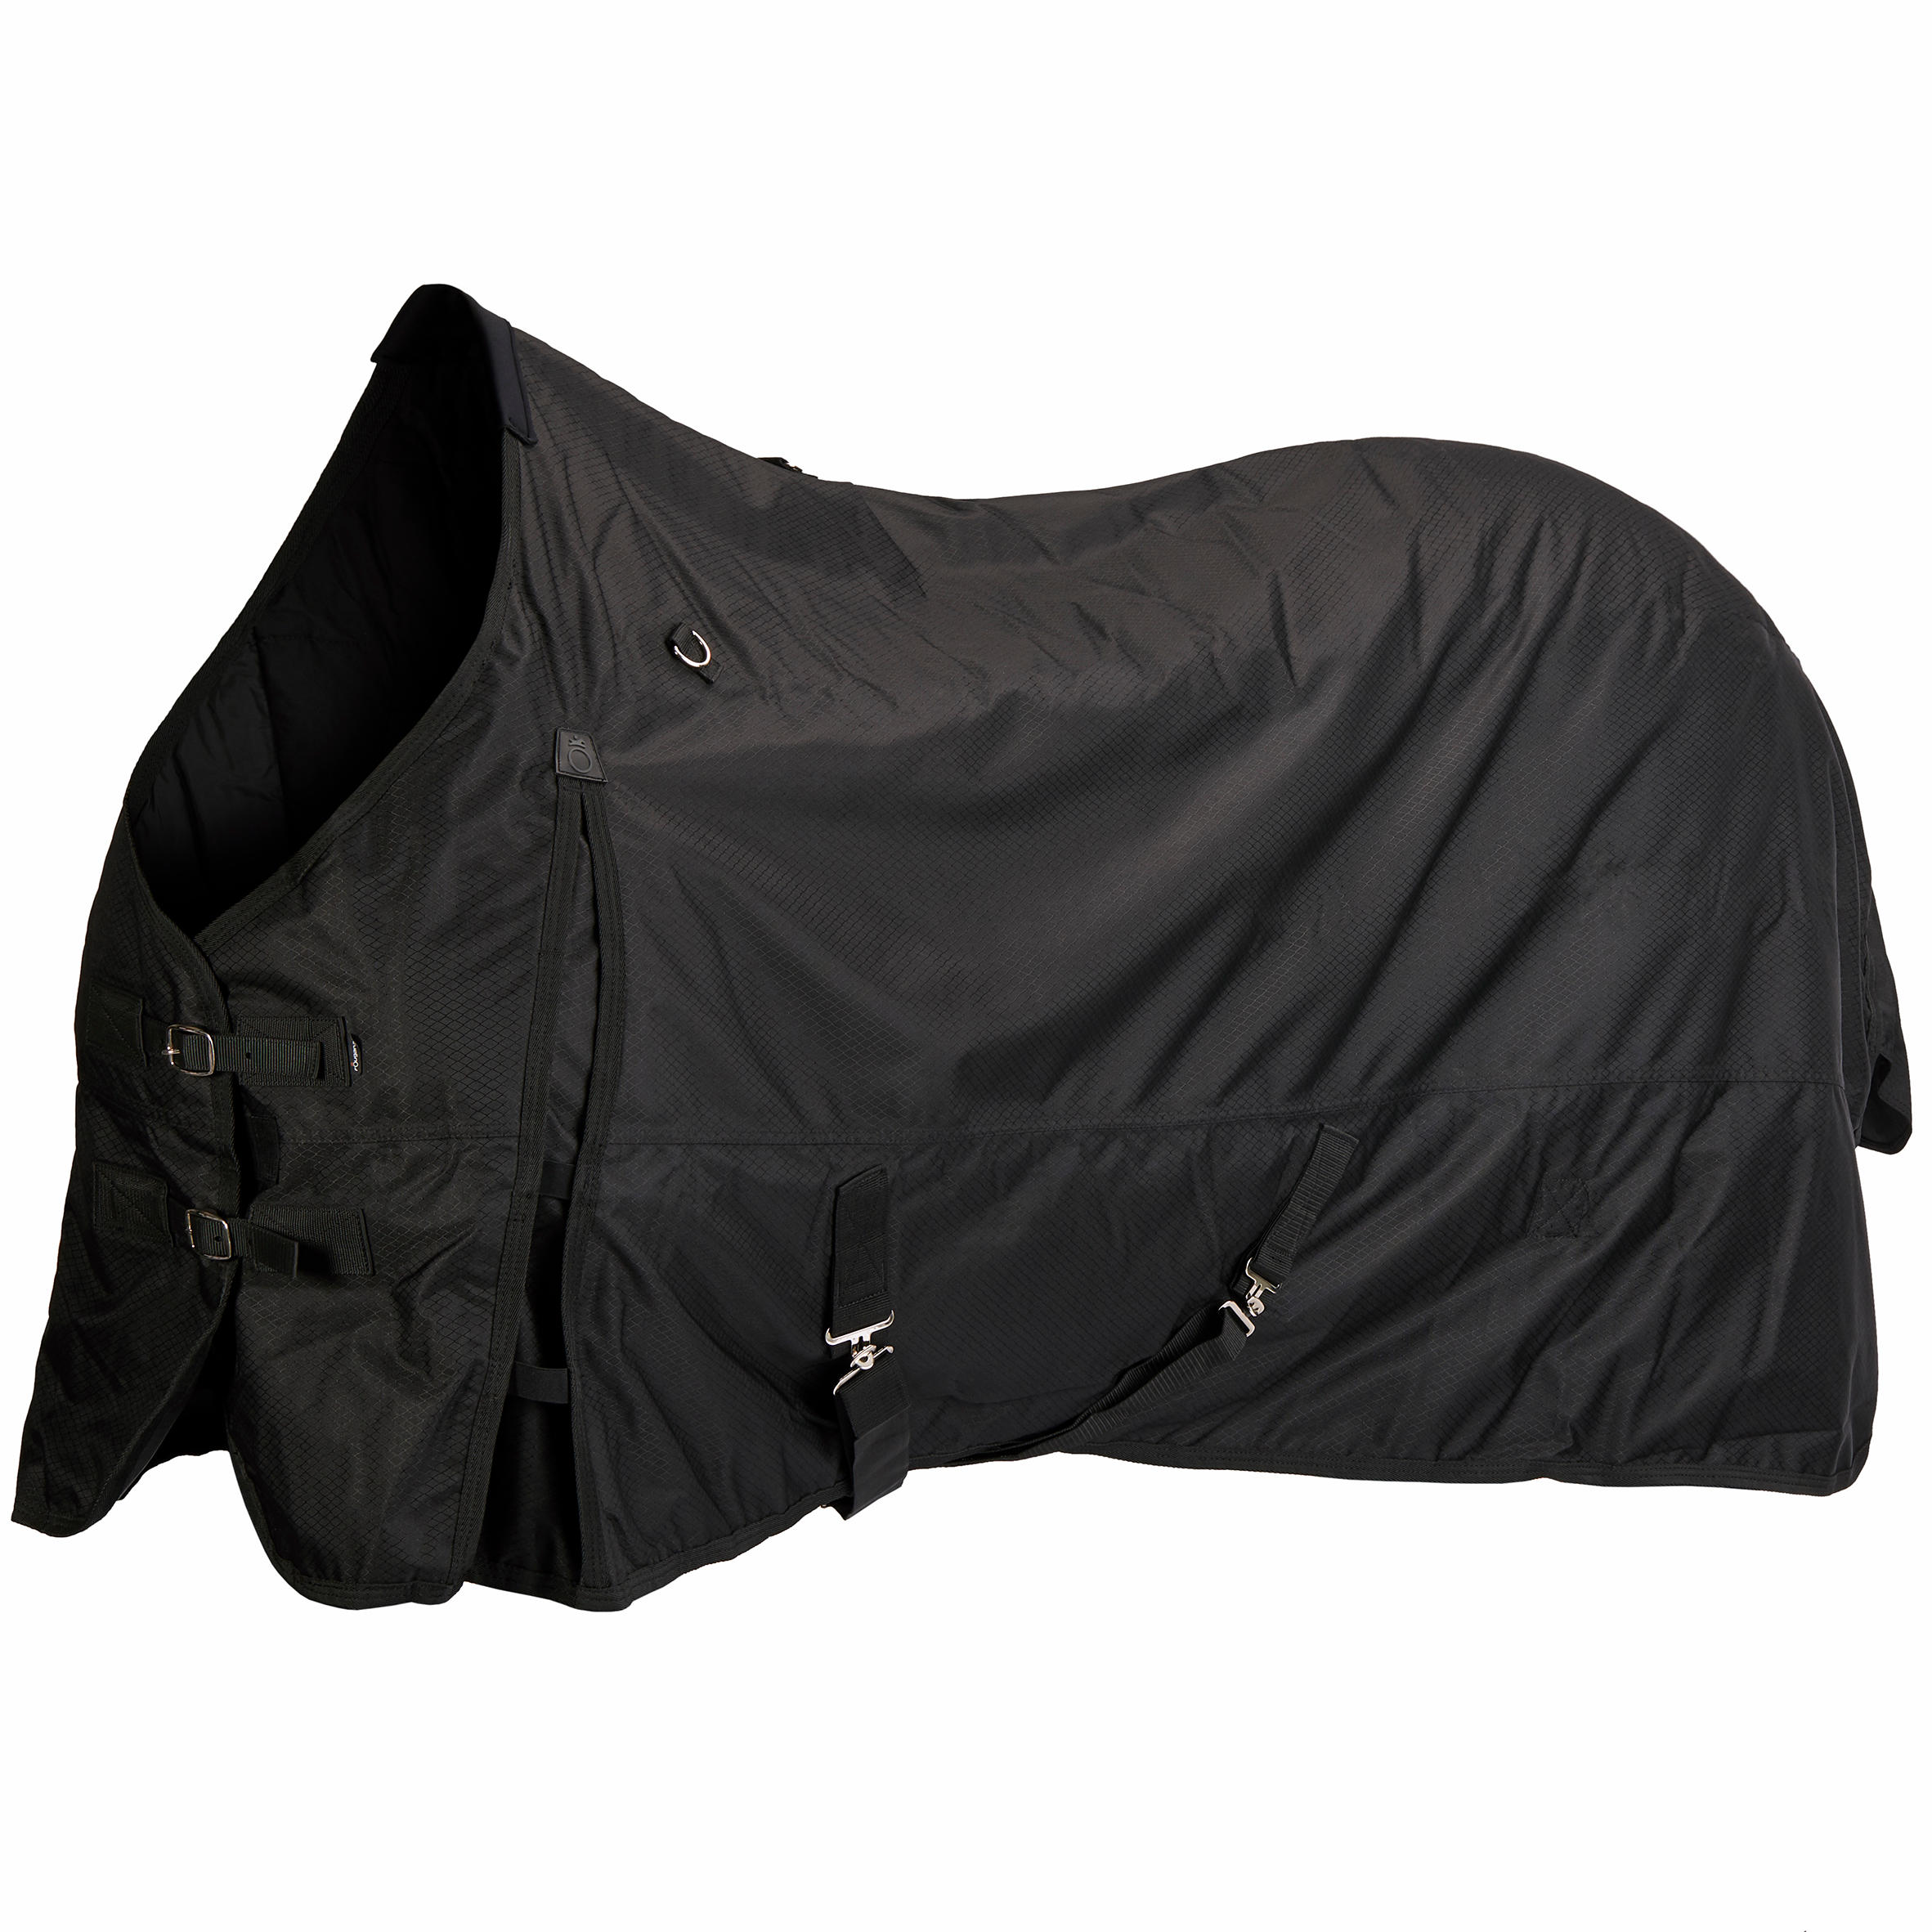 FOUGANZA Allweather 200 600D Horse and Pony Waterproof Rug - Black